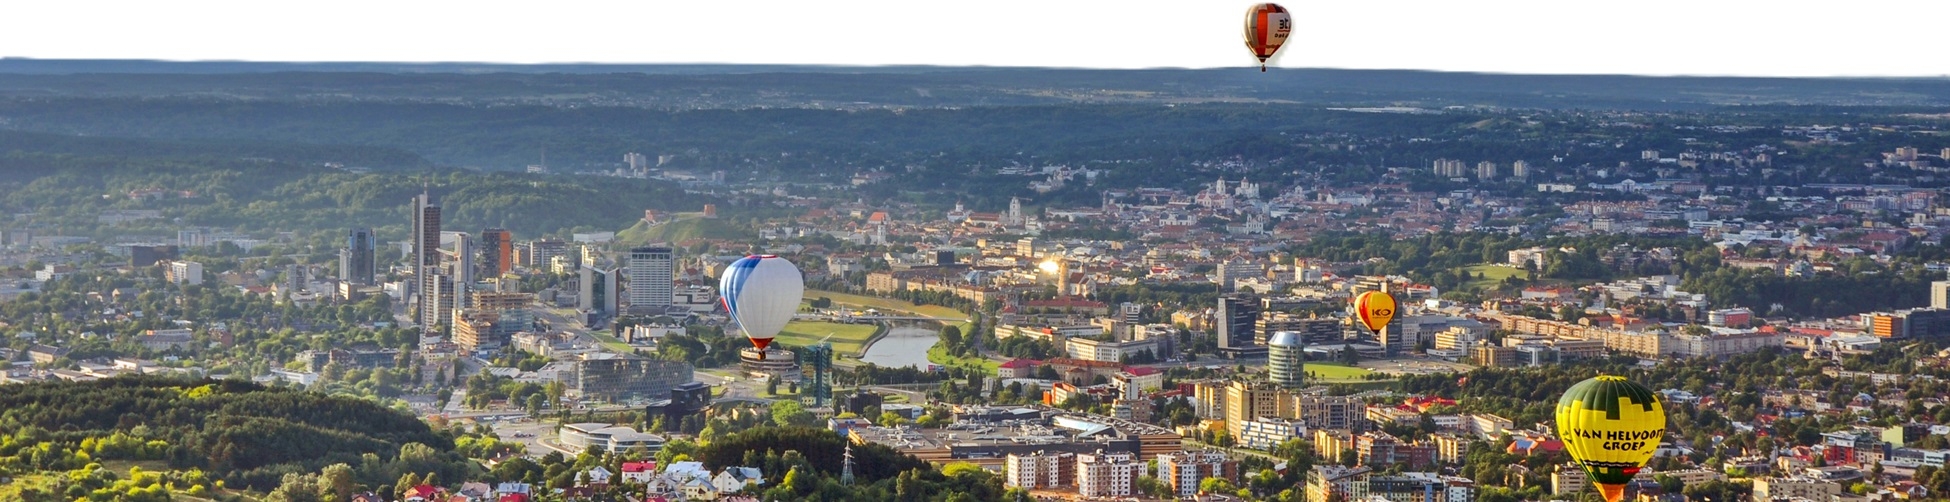 Hot air balloons flying over Vilnius, Lithuania's capital